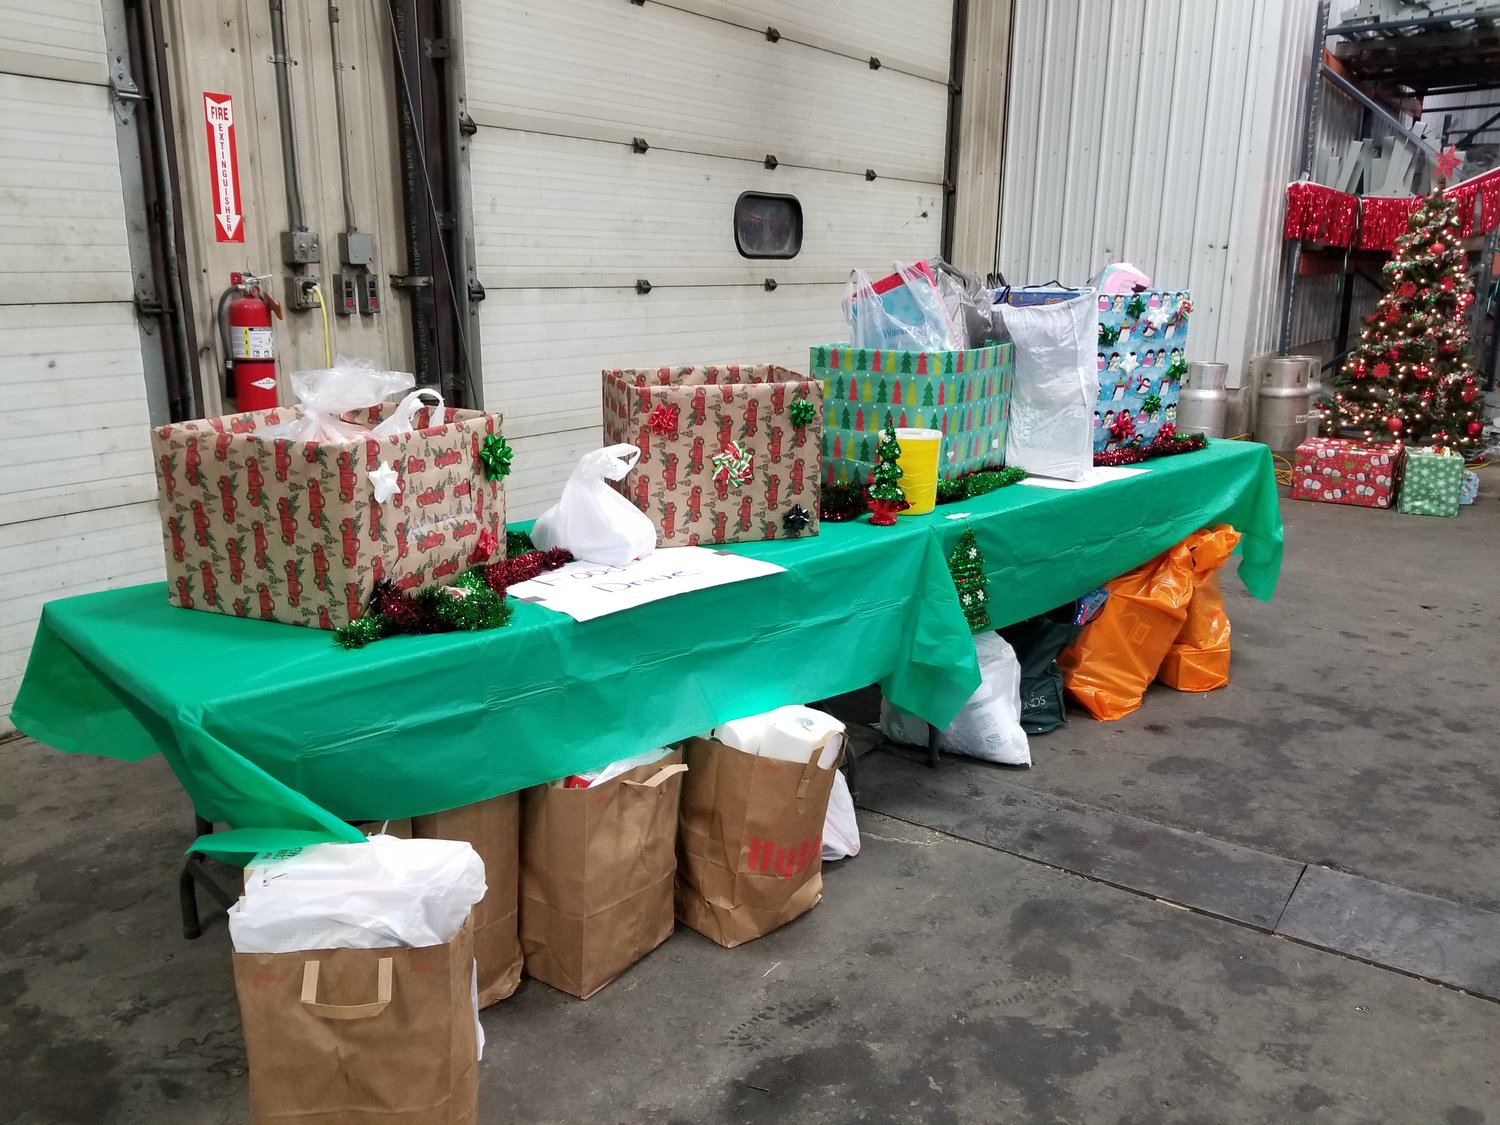 Visitors to the Bellechester event helped spread Christmas cheer by donating items to the local food-shelf and Toys For Tots.